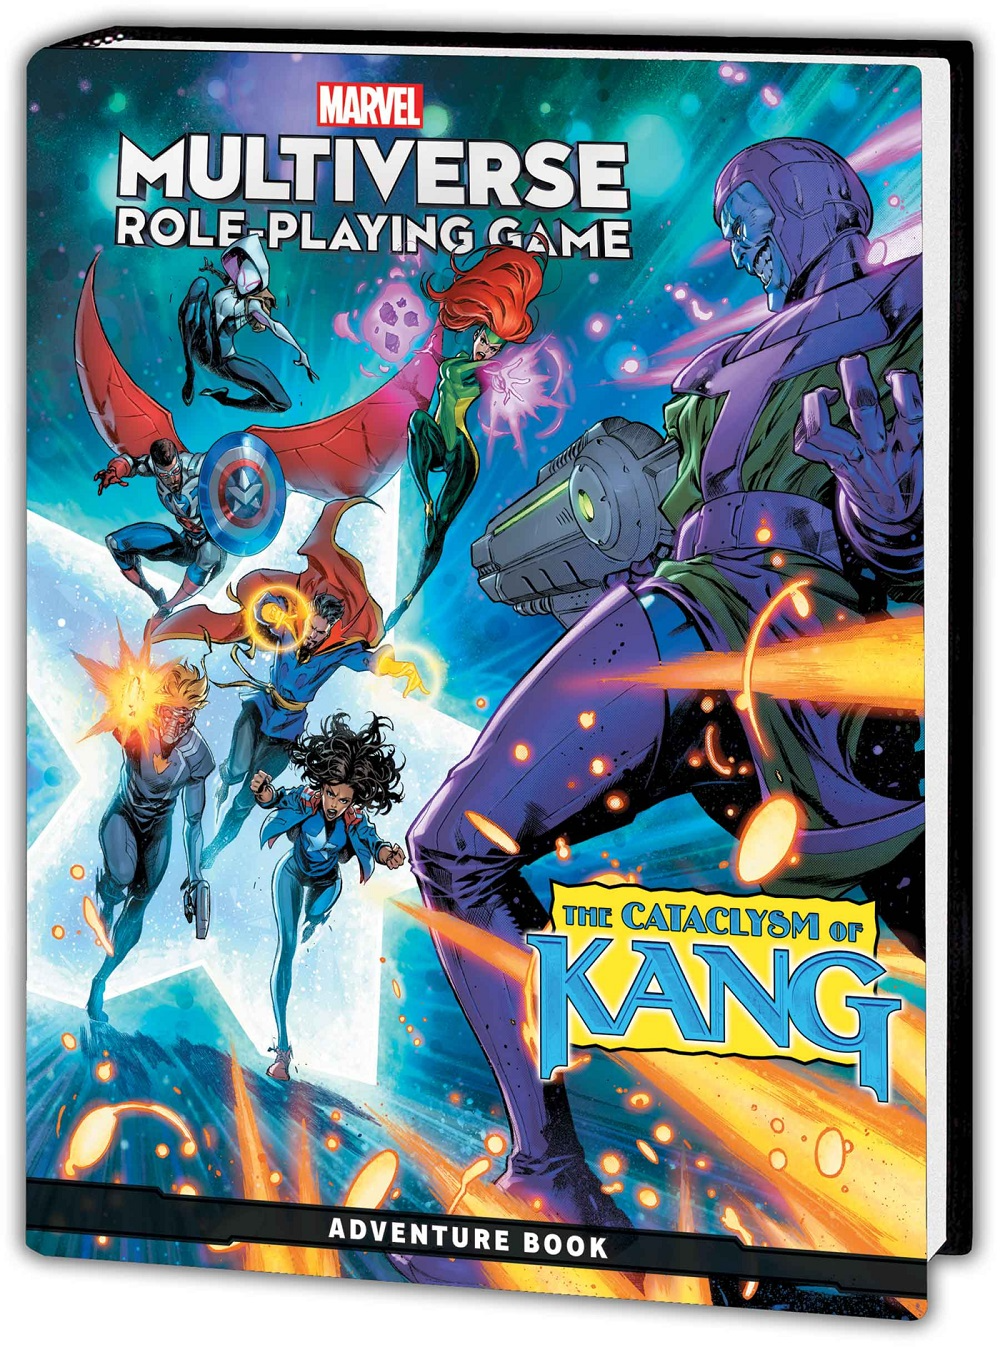 Marvel Multiverse RPG - The Cataclysm of Kang Adventure Book HC